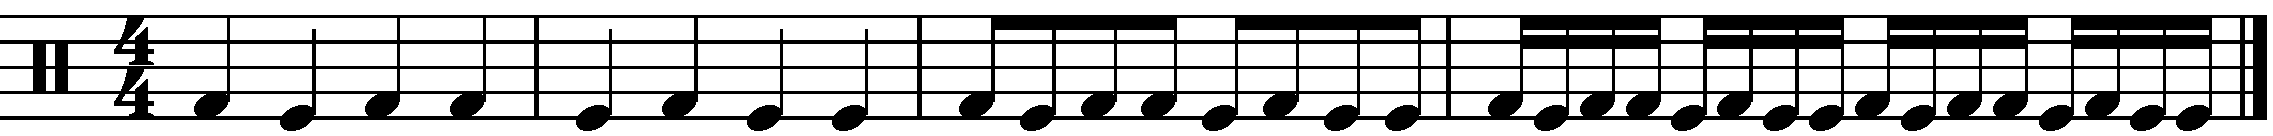 The paradiddle exercise.